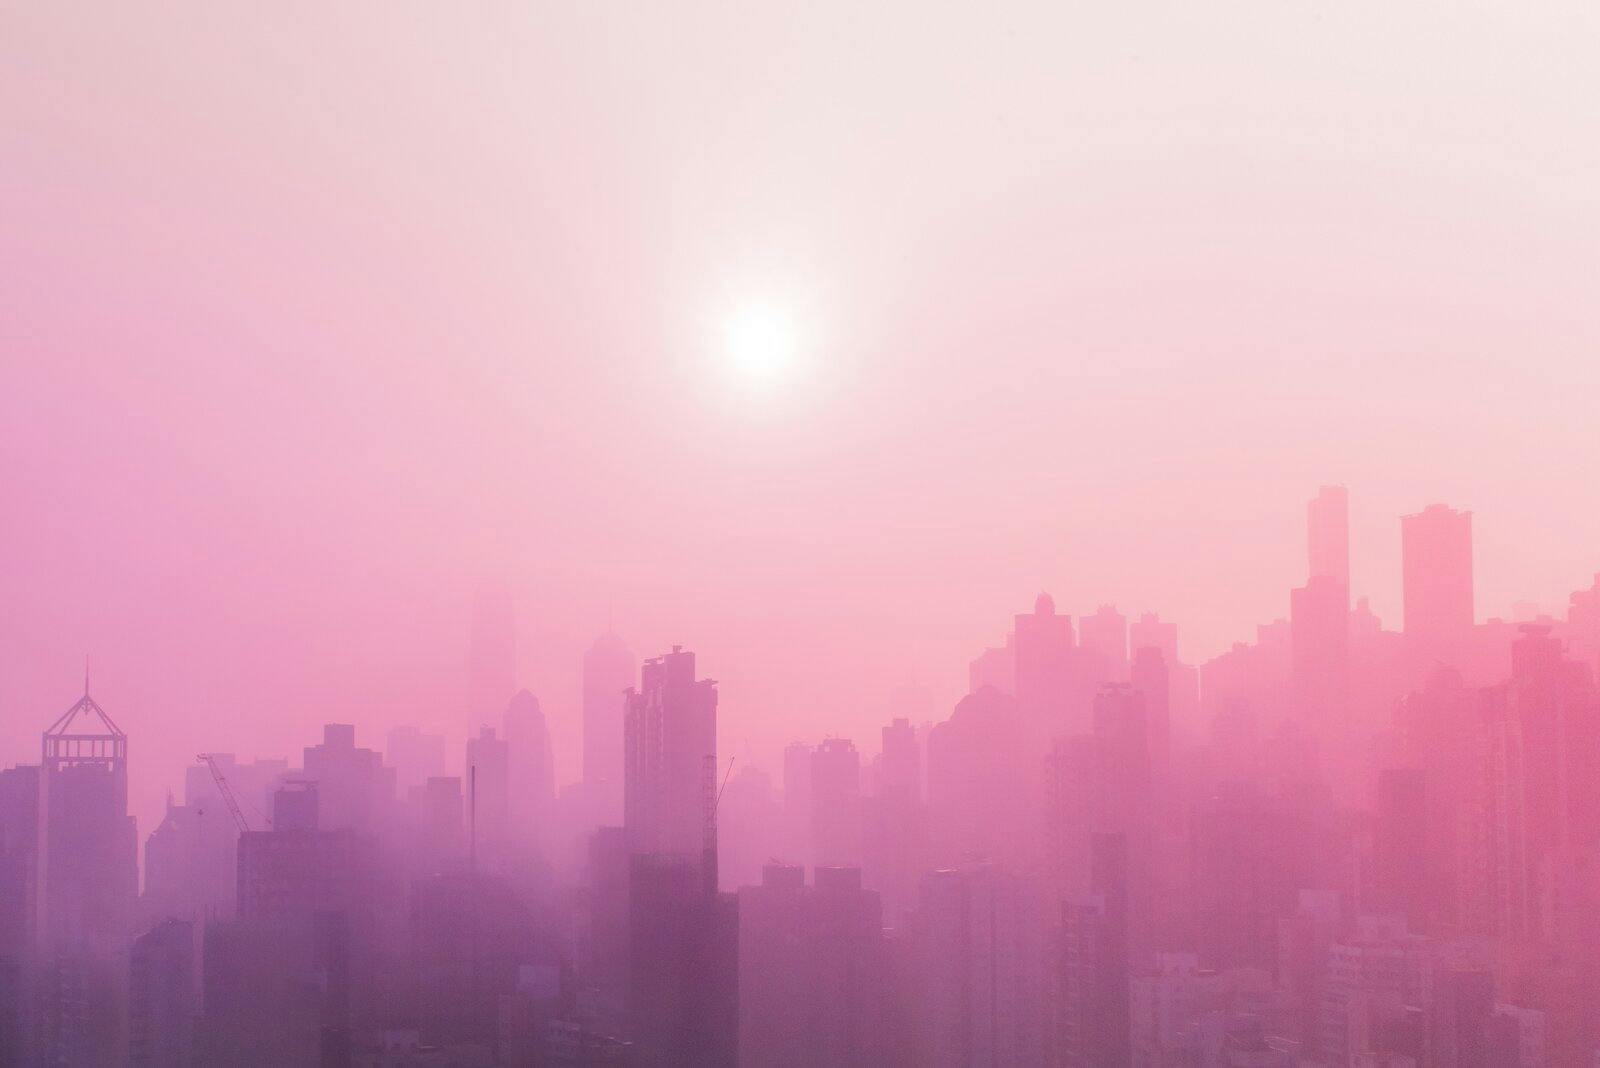 City sky line in a hazy pink colour